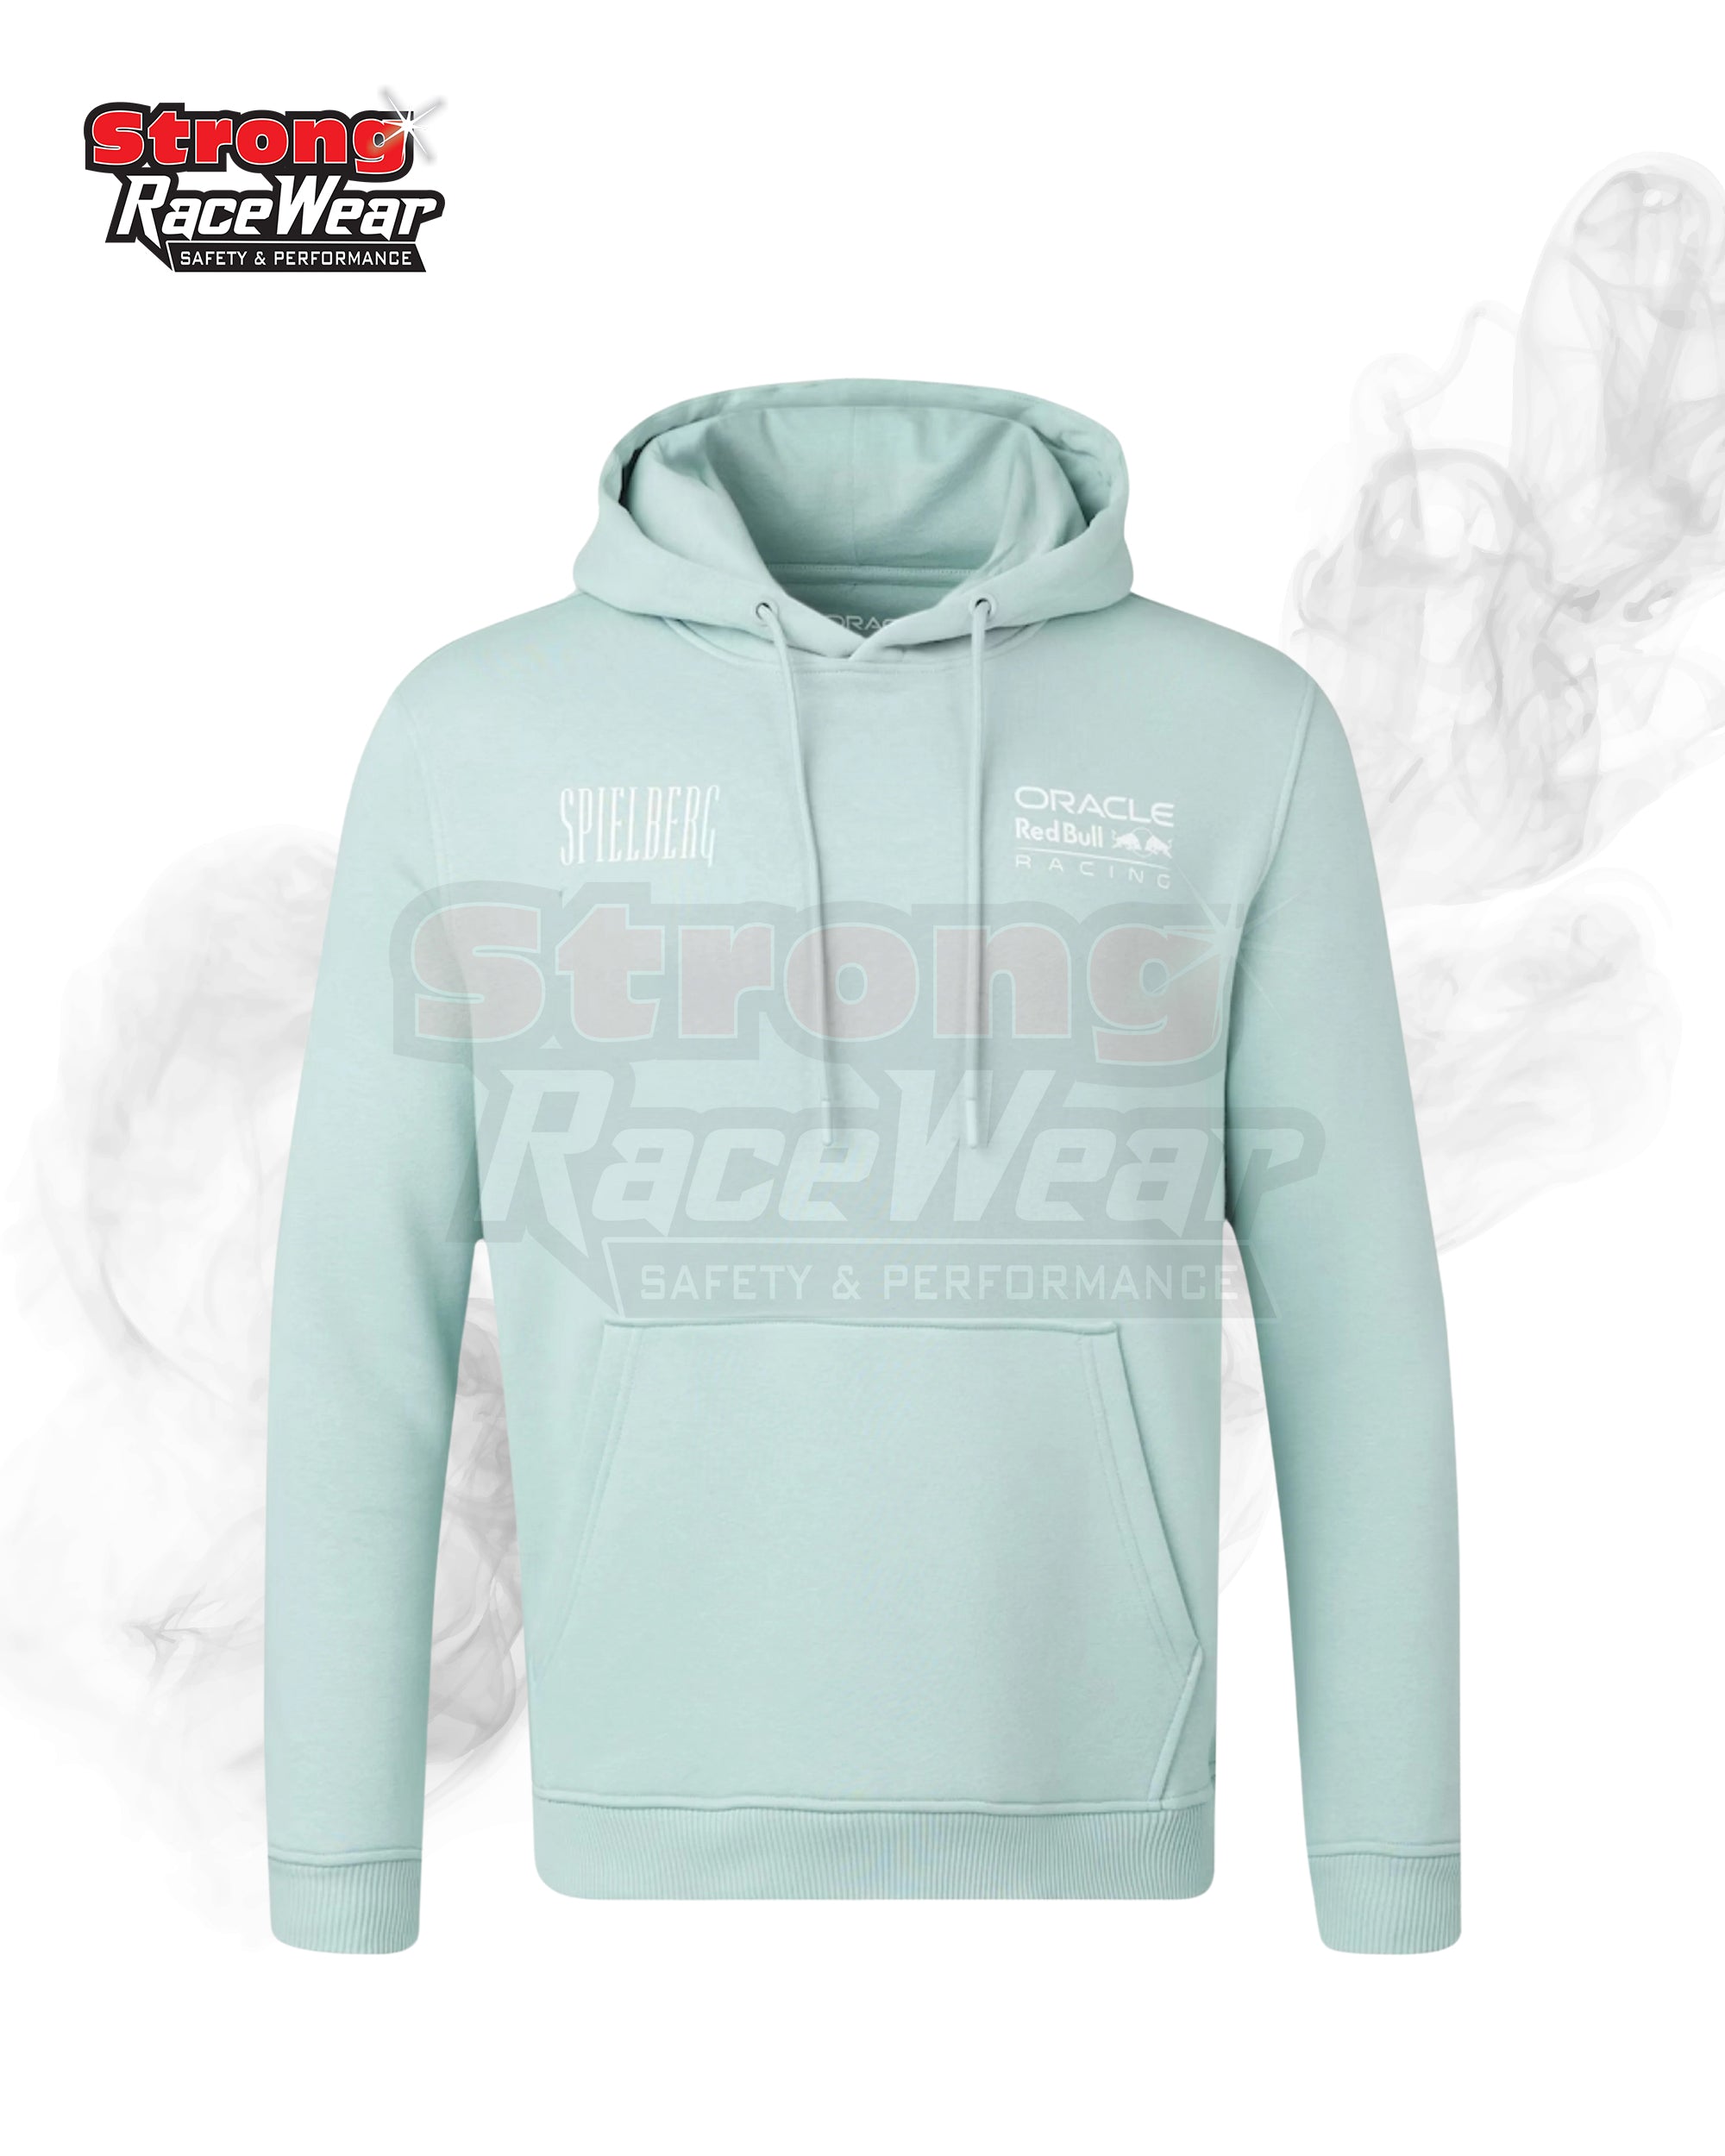 Oracle Red Bull Racing Austria Special Edition Hoodies